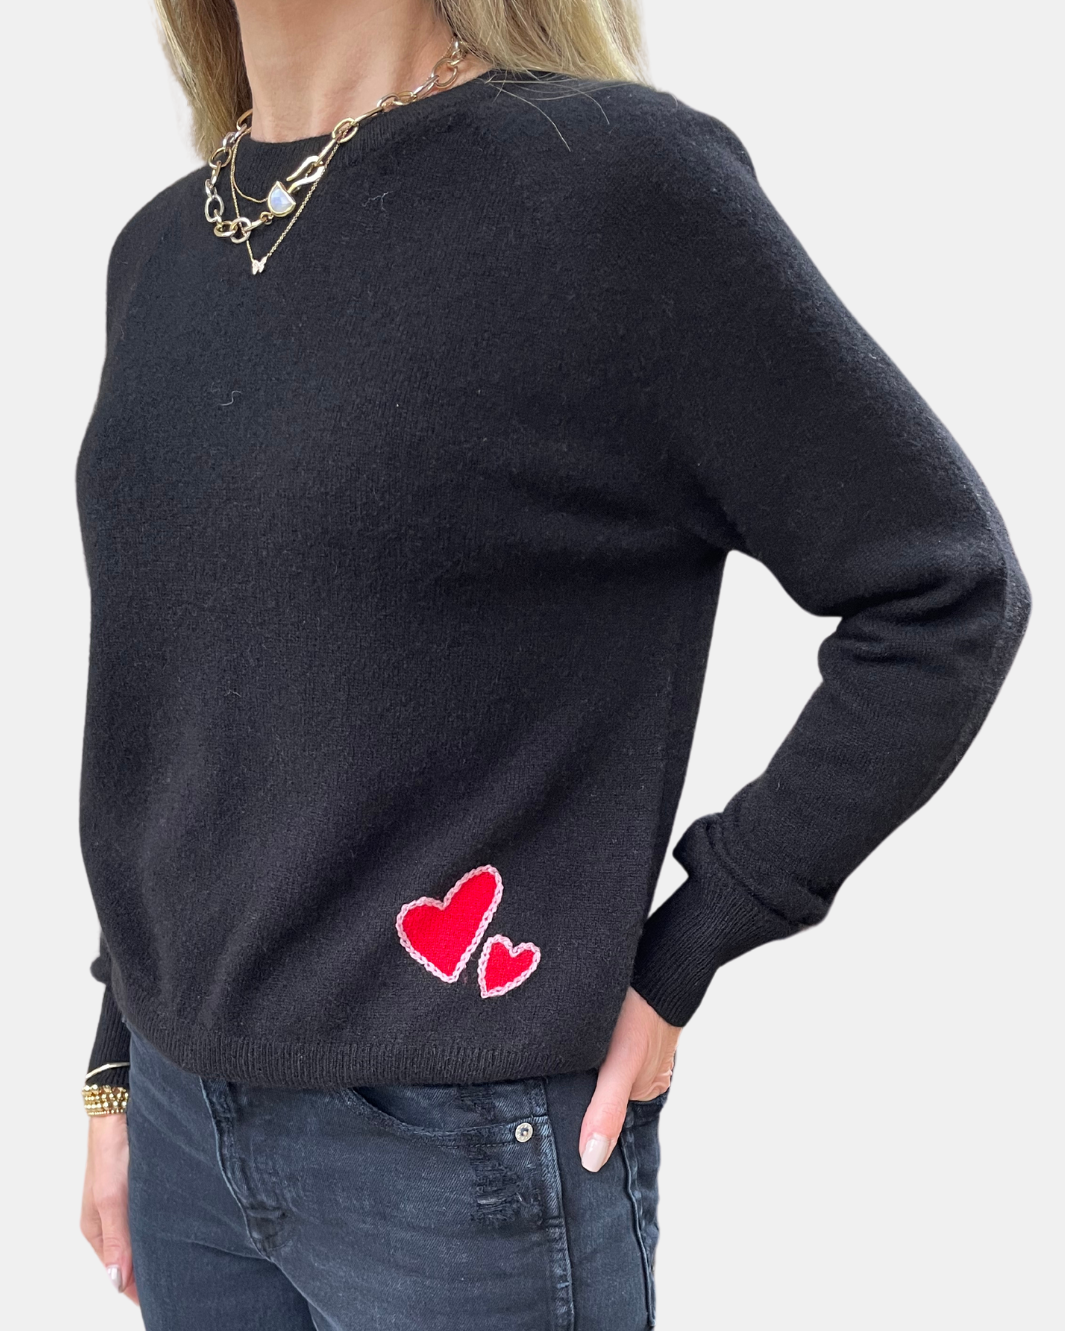 CASHMERE EMBROIDERED HEART SWEATSHIRT IN BLACK COMBO - Romi Boutique